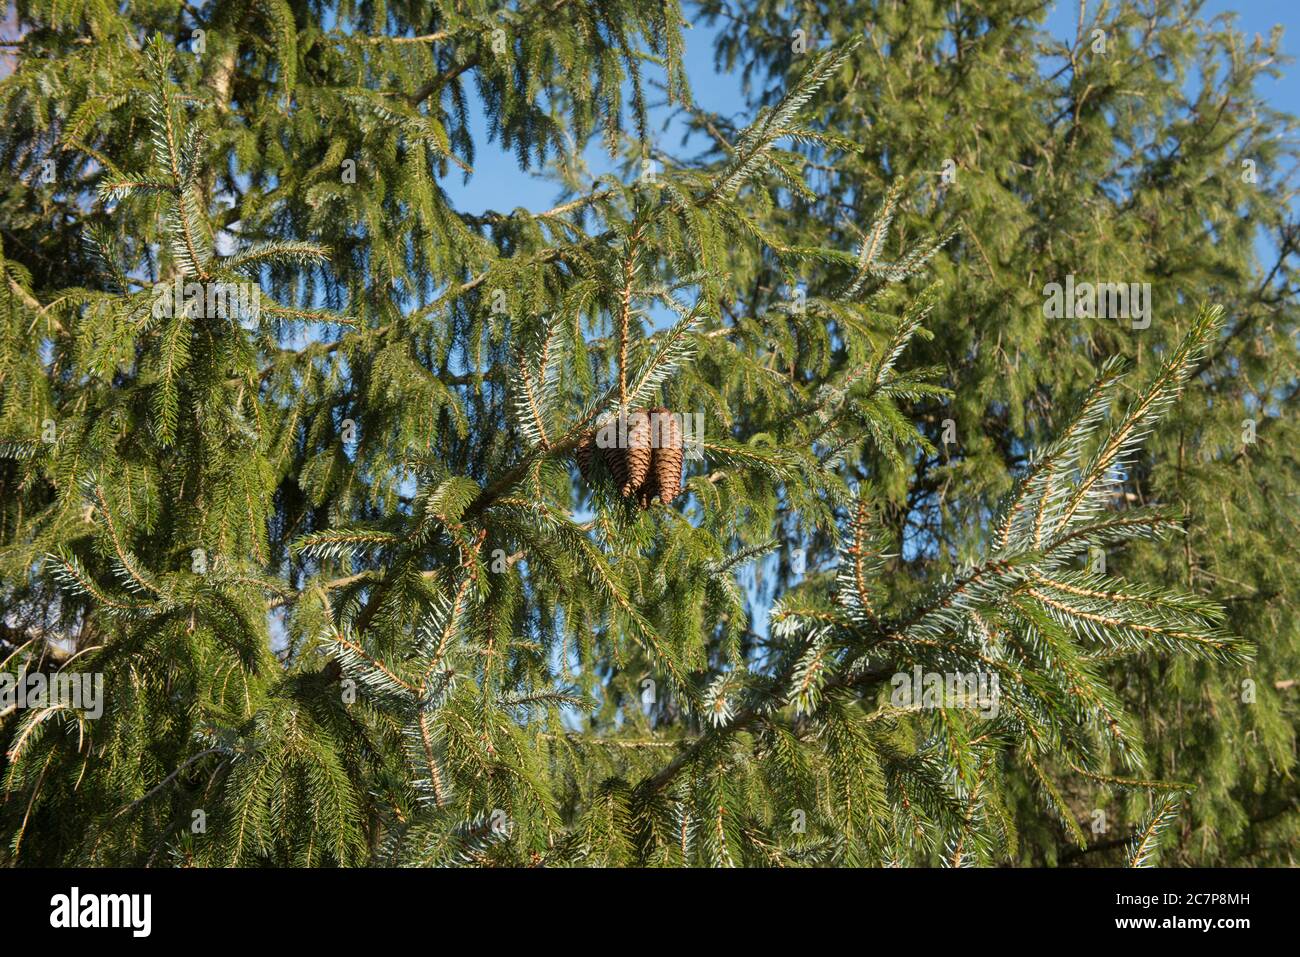 Green Foliage and Cones of a Sargent Spruce Tree (Picea brachytyla) with a Bright Blue Sky background in a Woodland Garden in Rural Devon, England, UK Stock Photo